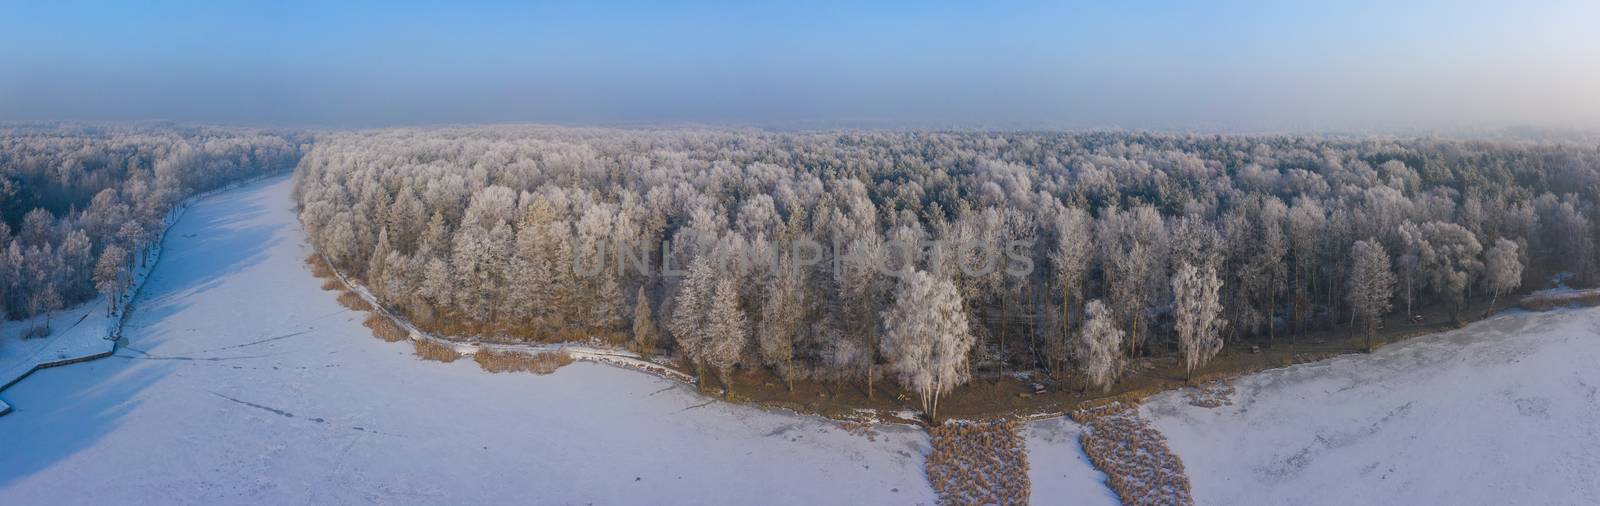 Rime and hoarfrost covering trees. Aerial view of the snow-covered forest and lake from above. Winter scenery. Landscape photo captured with drone.